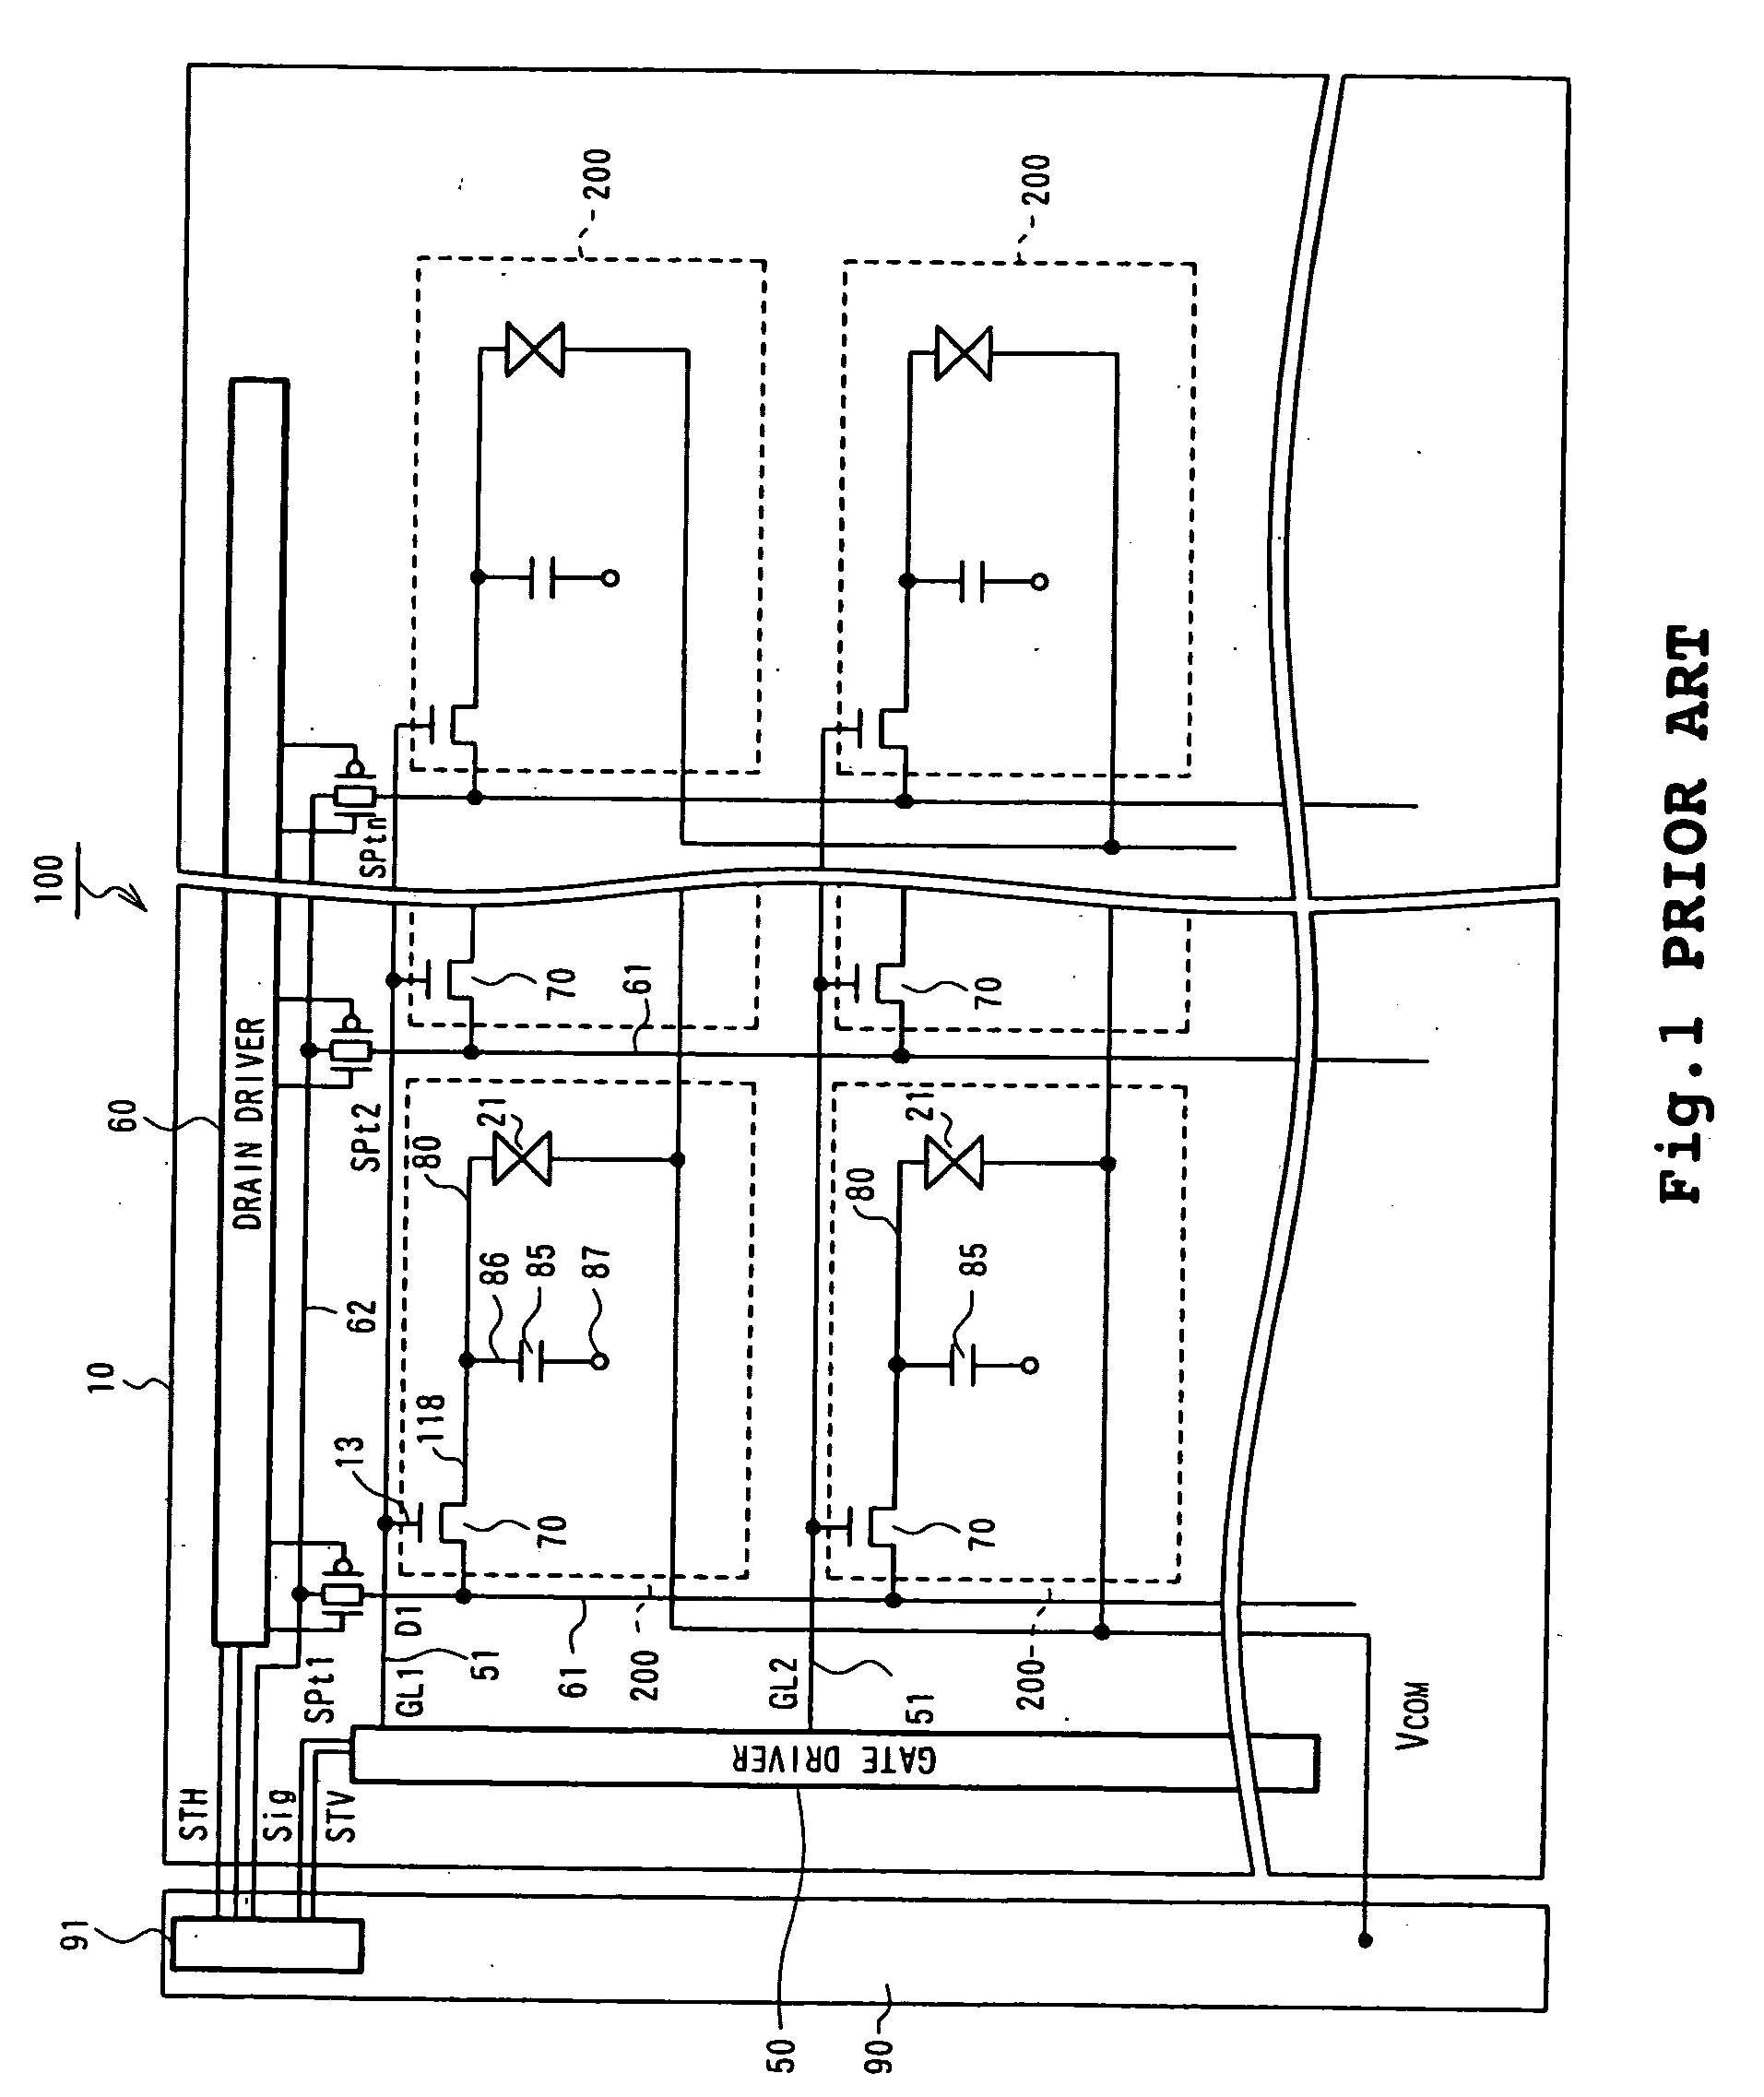 Power consumption of display apparatus during still image display mode